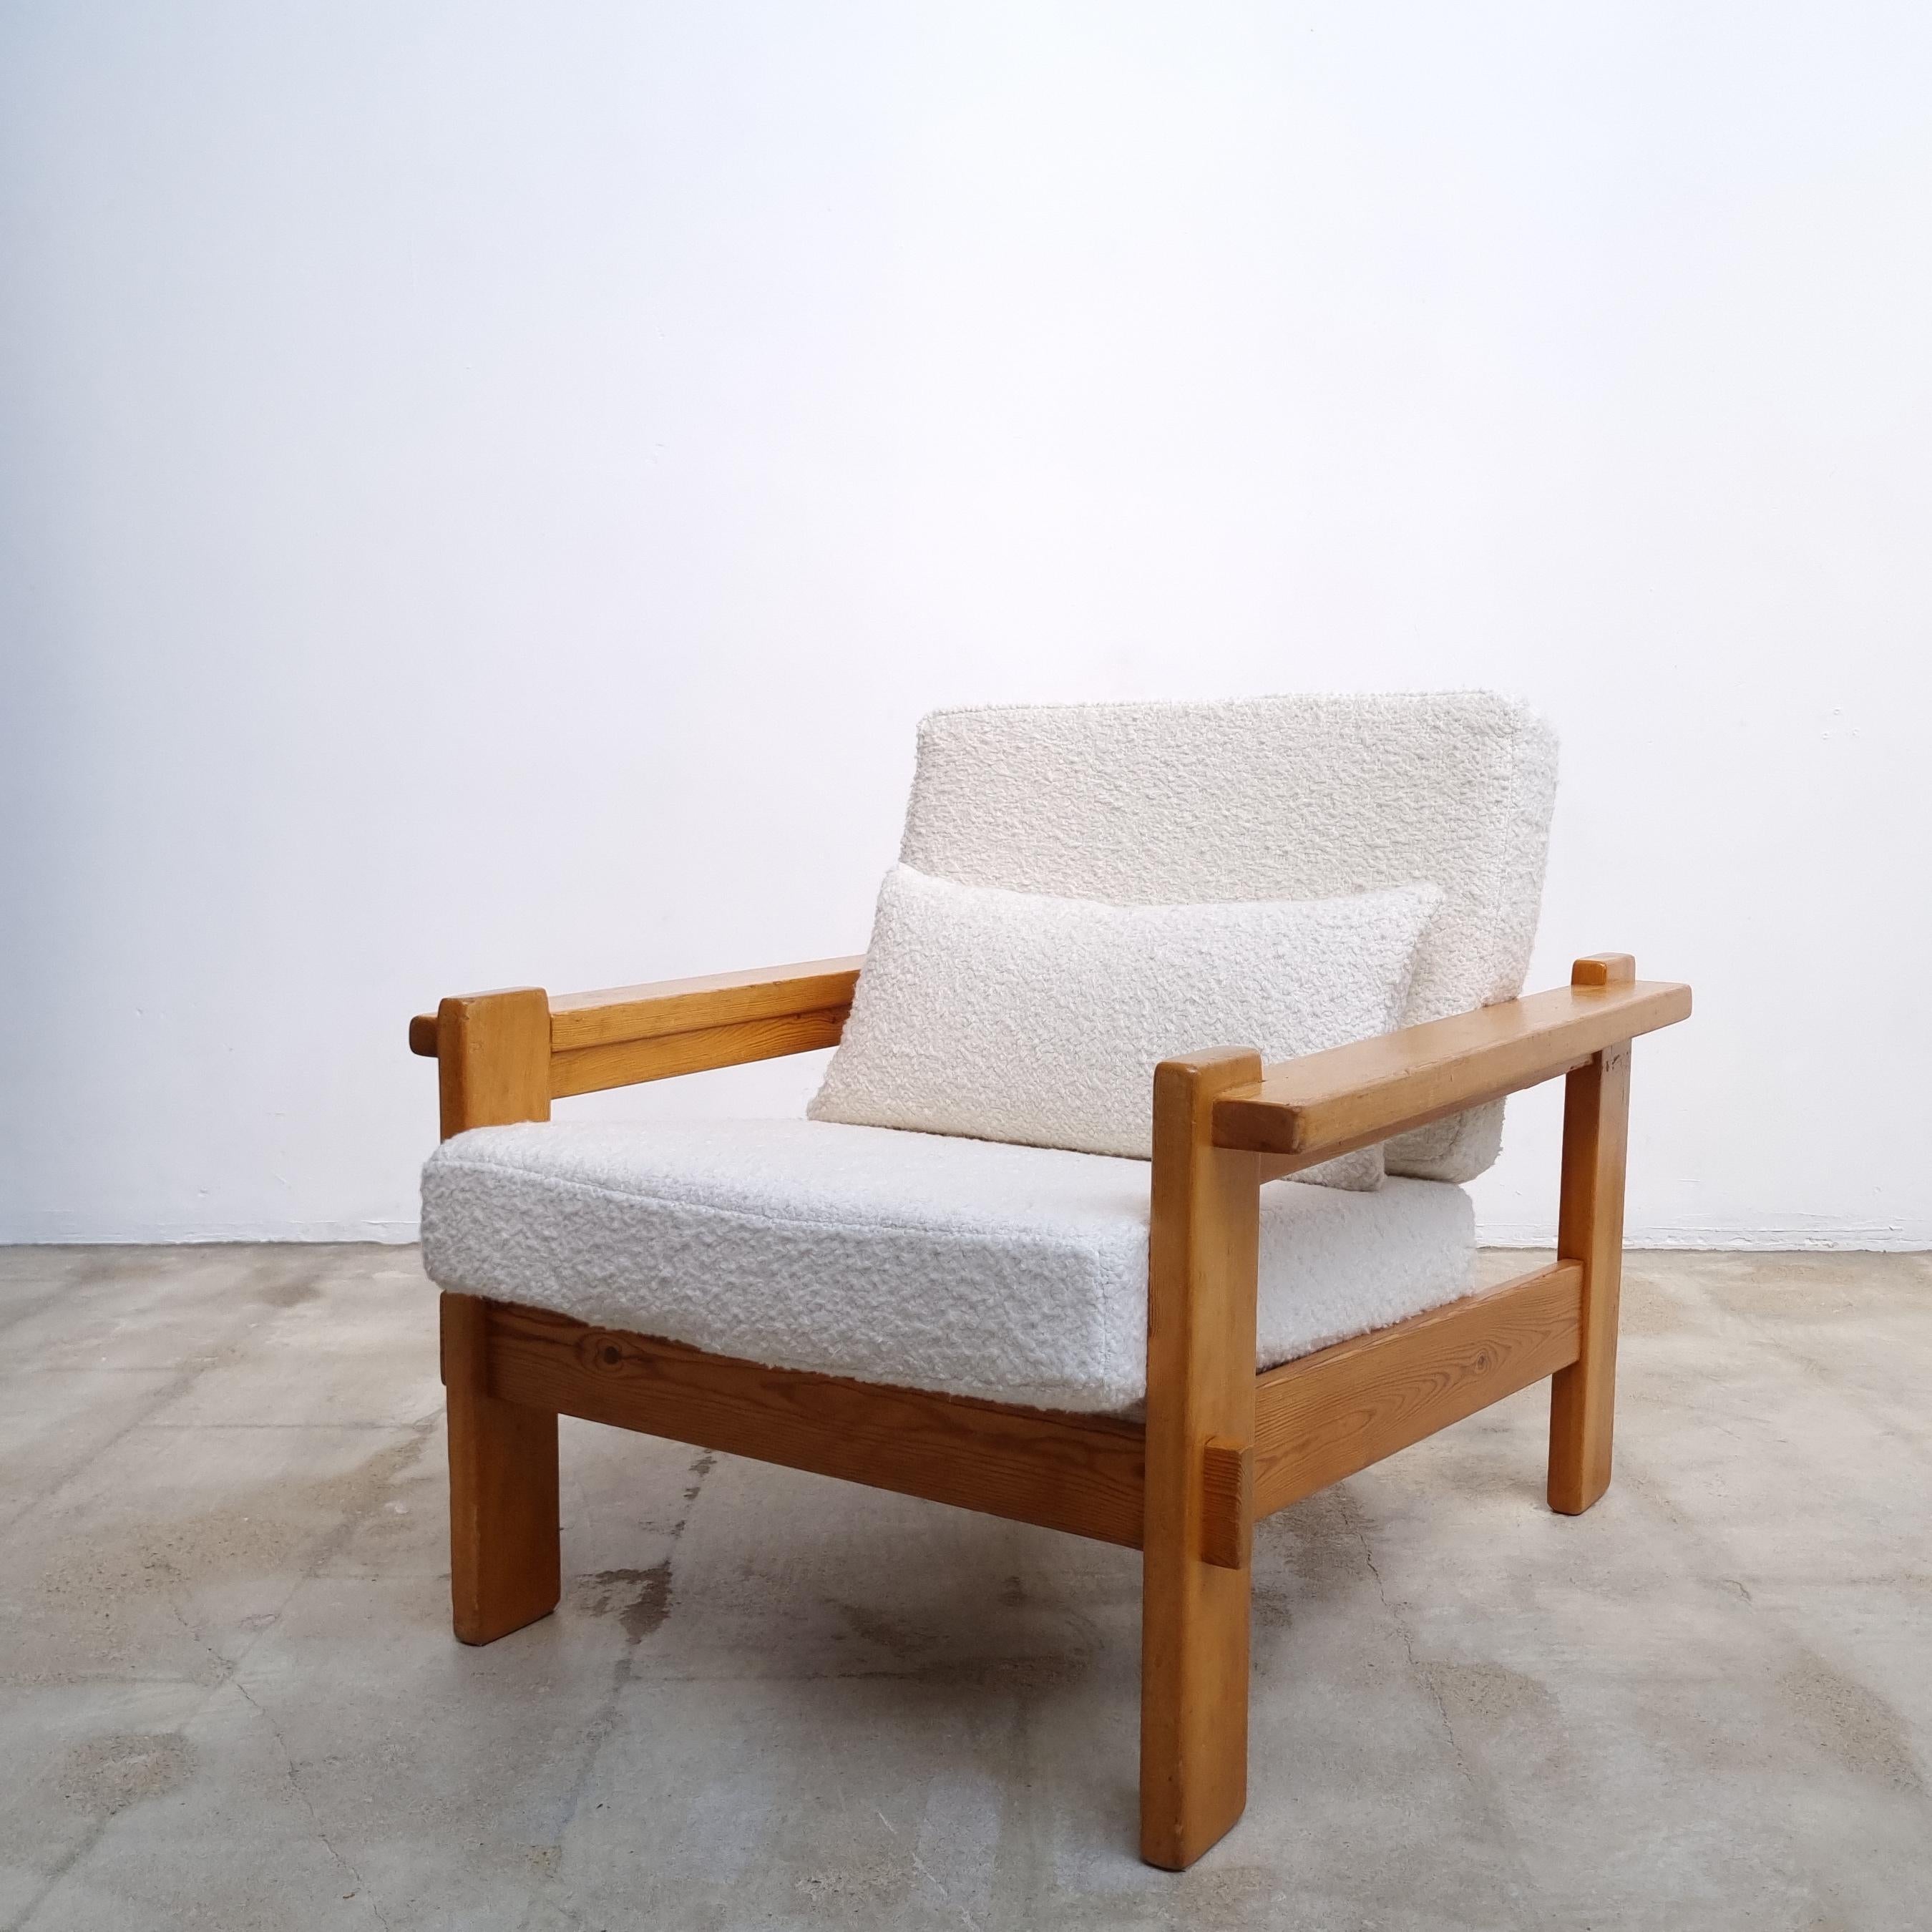 Revival of the Seventies! Lounge chair in solid pine, Denmark, 70s. Cushions reupholstered in new Italian Orsetto bouclé fabric. Very good vintage condition.